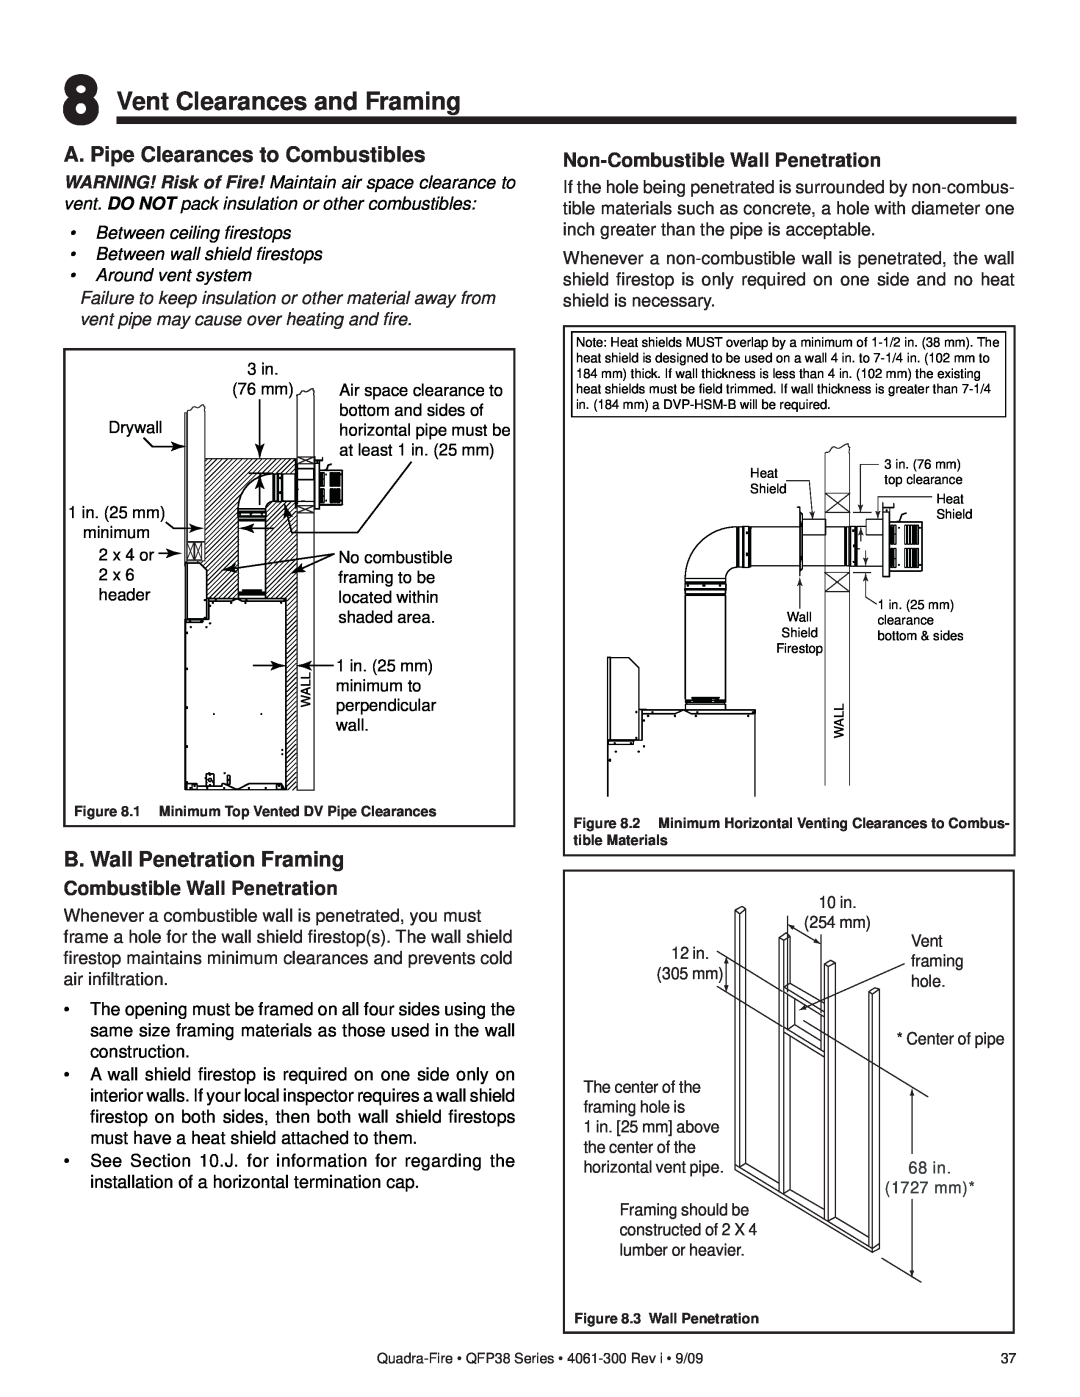 Quadra-Fire QFP38-LP Vent Clearances and Framing, A. Pipe Clearances to Combustibles, B. Wall Penetration Framing 